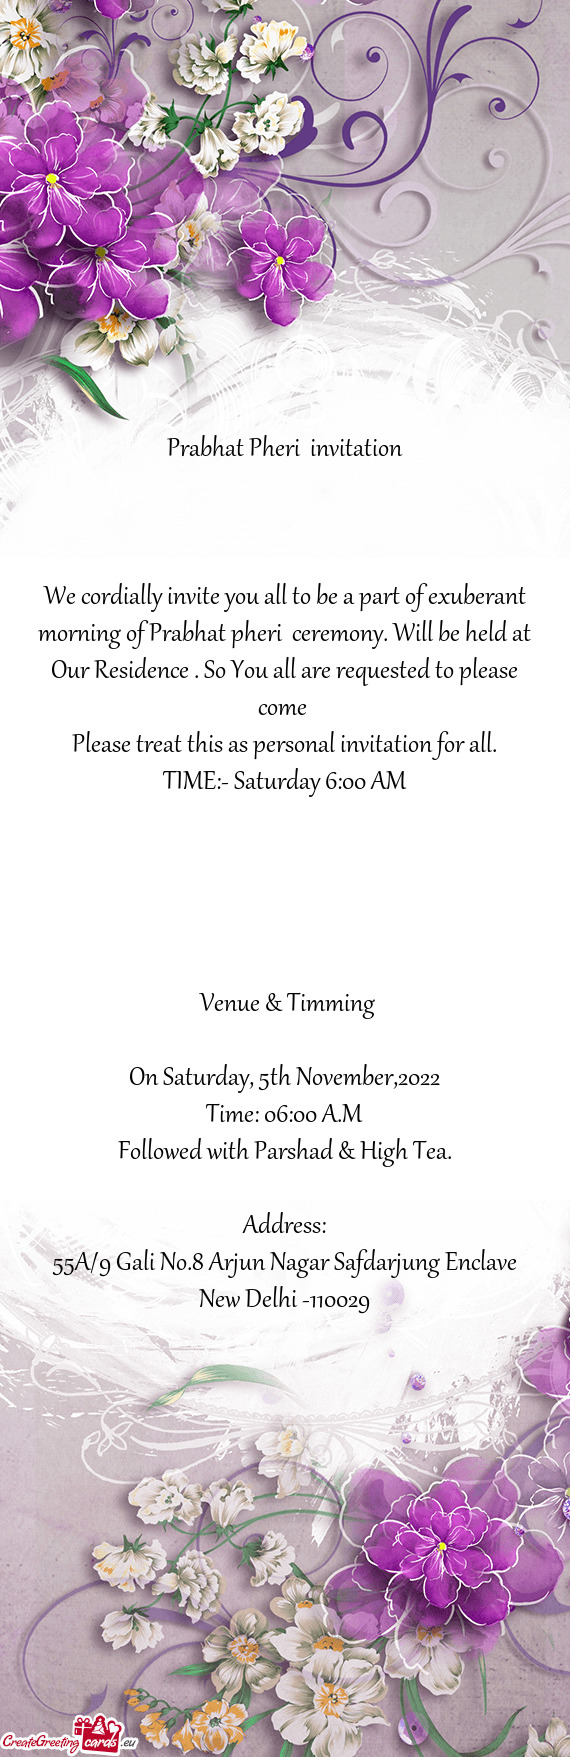 We cordially invite you all to be a part of exuberant morning of Prabhat pheri ceremony. Will be he